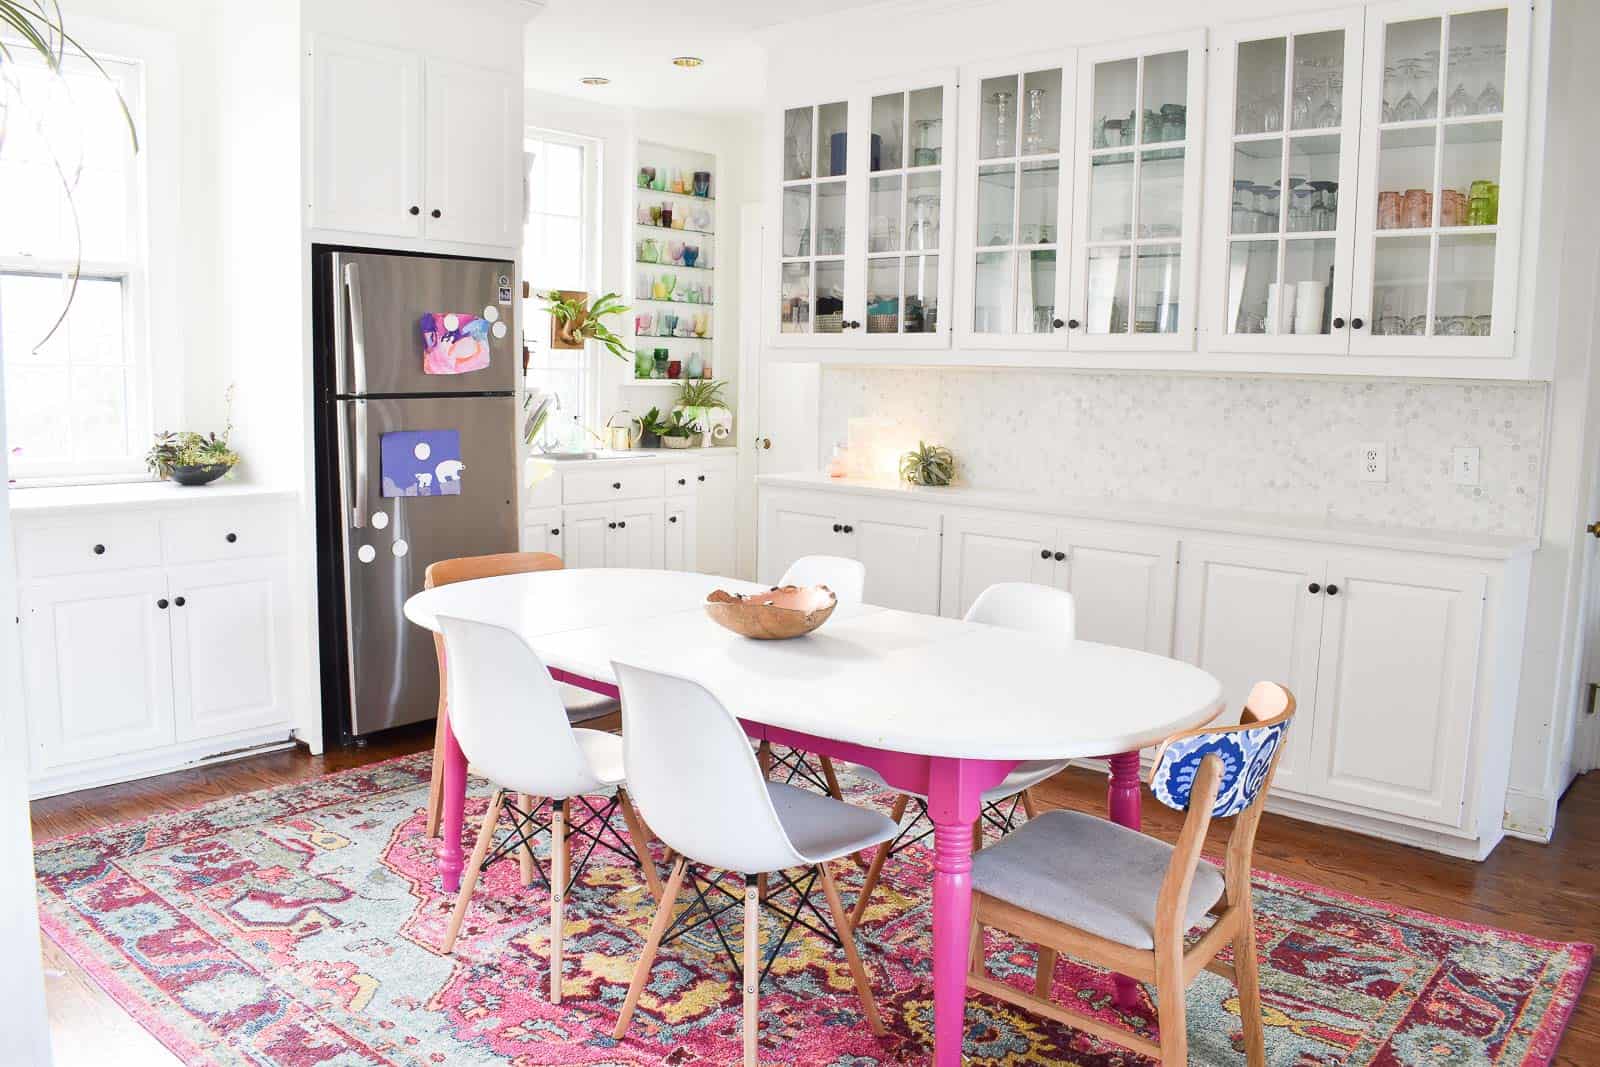 Looking for DIY kitchen makeover ideas? These 10 amazing renovations will blow your mind and have you planning your new kitchen! 